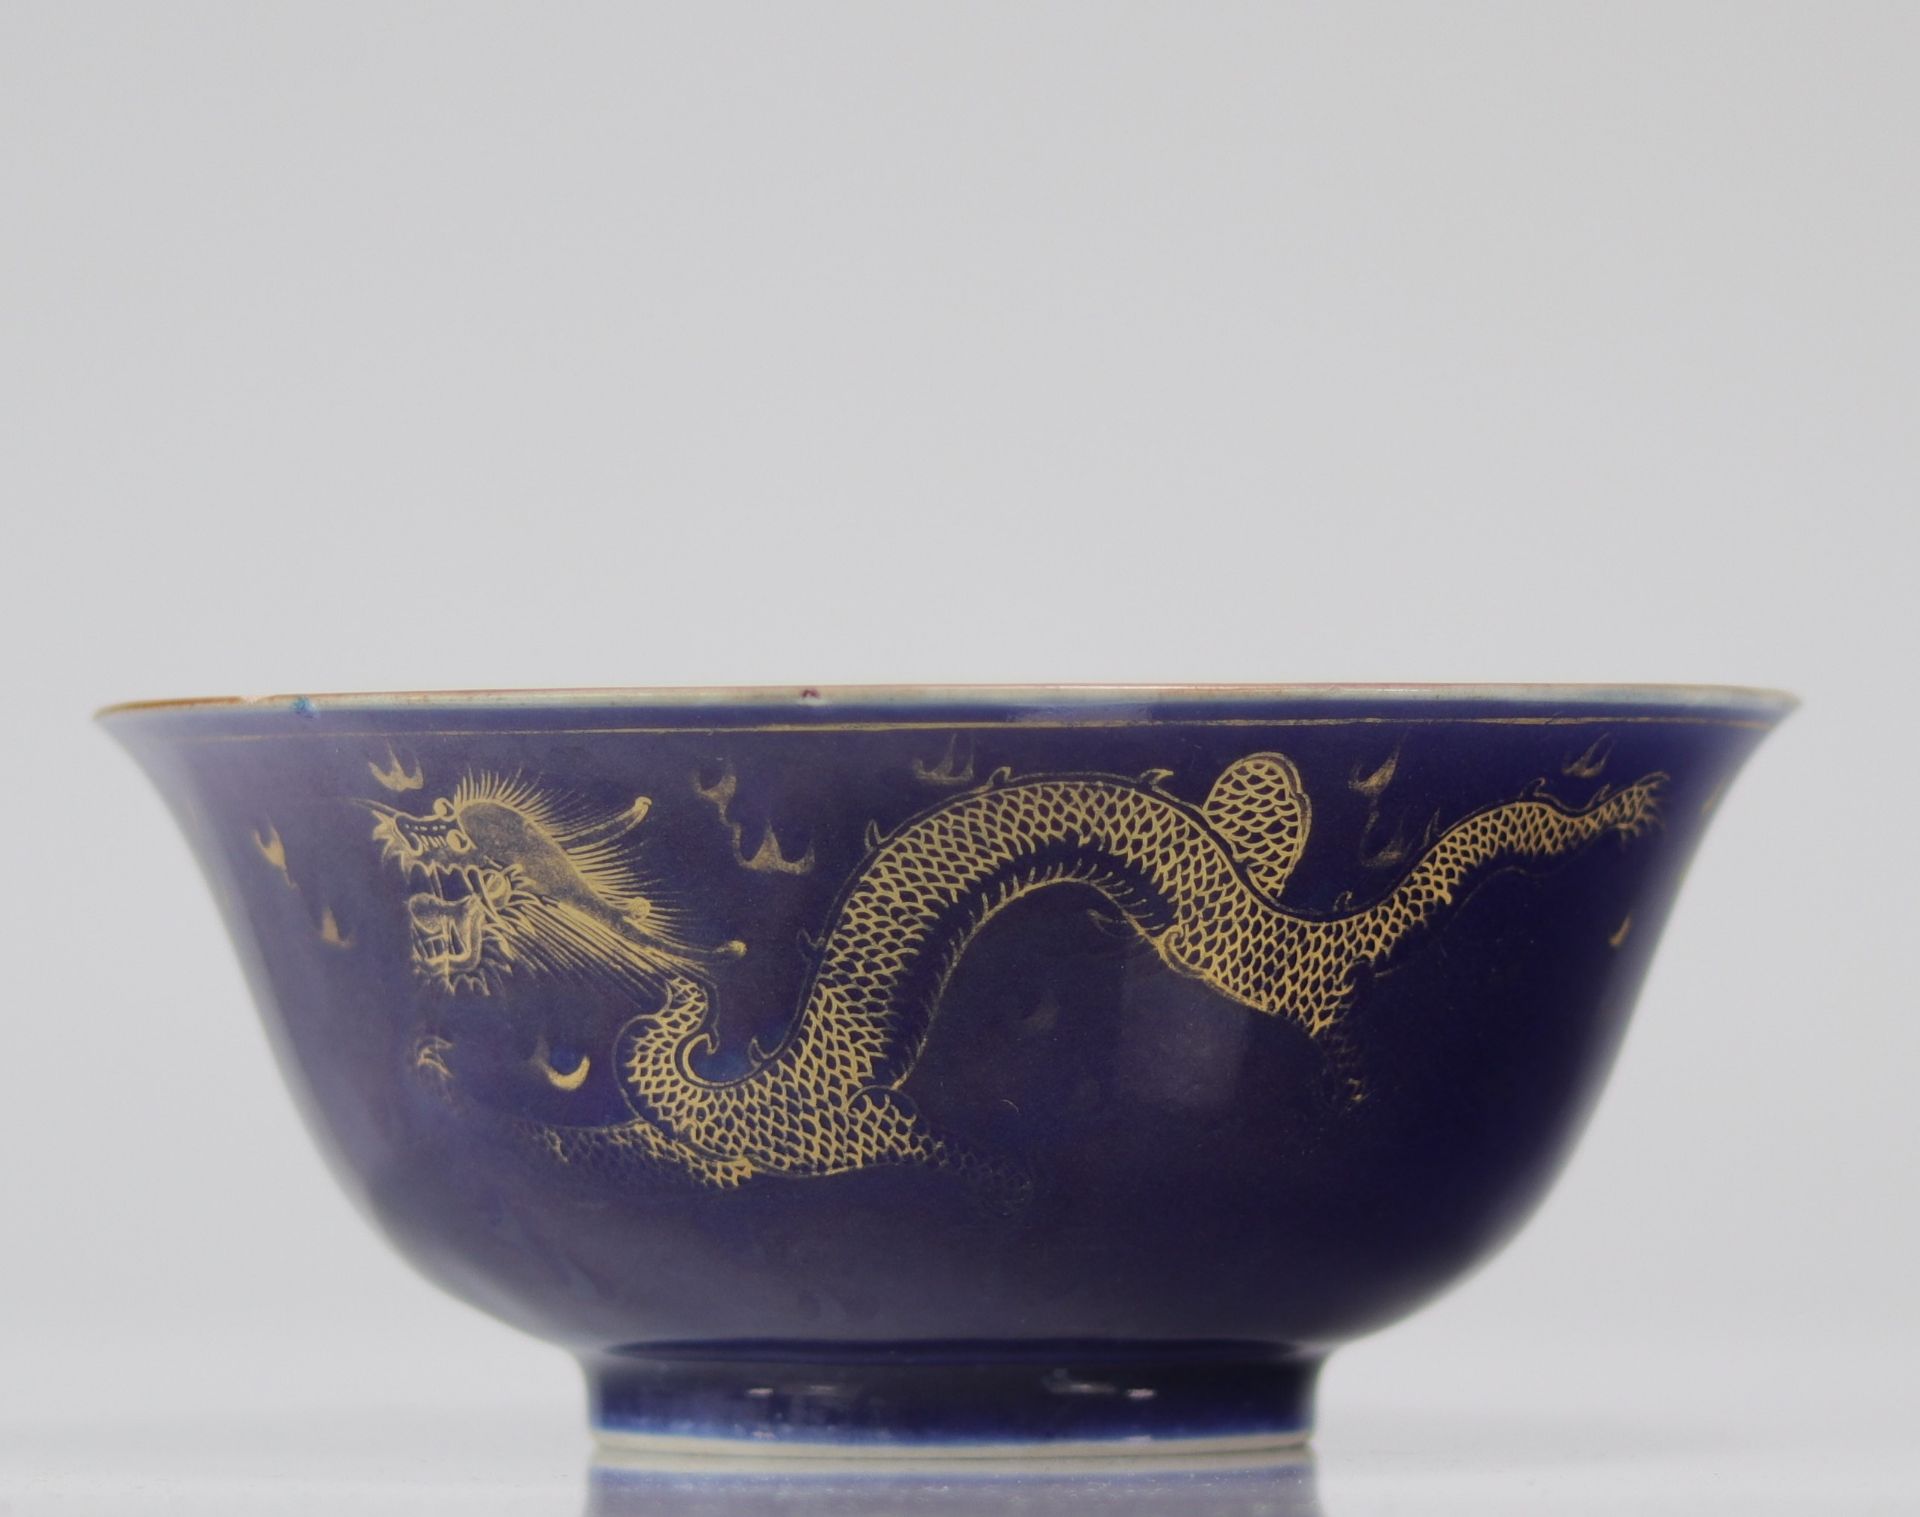 Large blue and gold powdered porcelain bowl with 18th century dragon decoration - Image 2 of 5